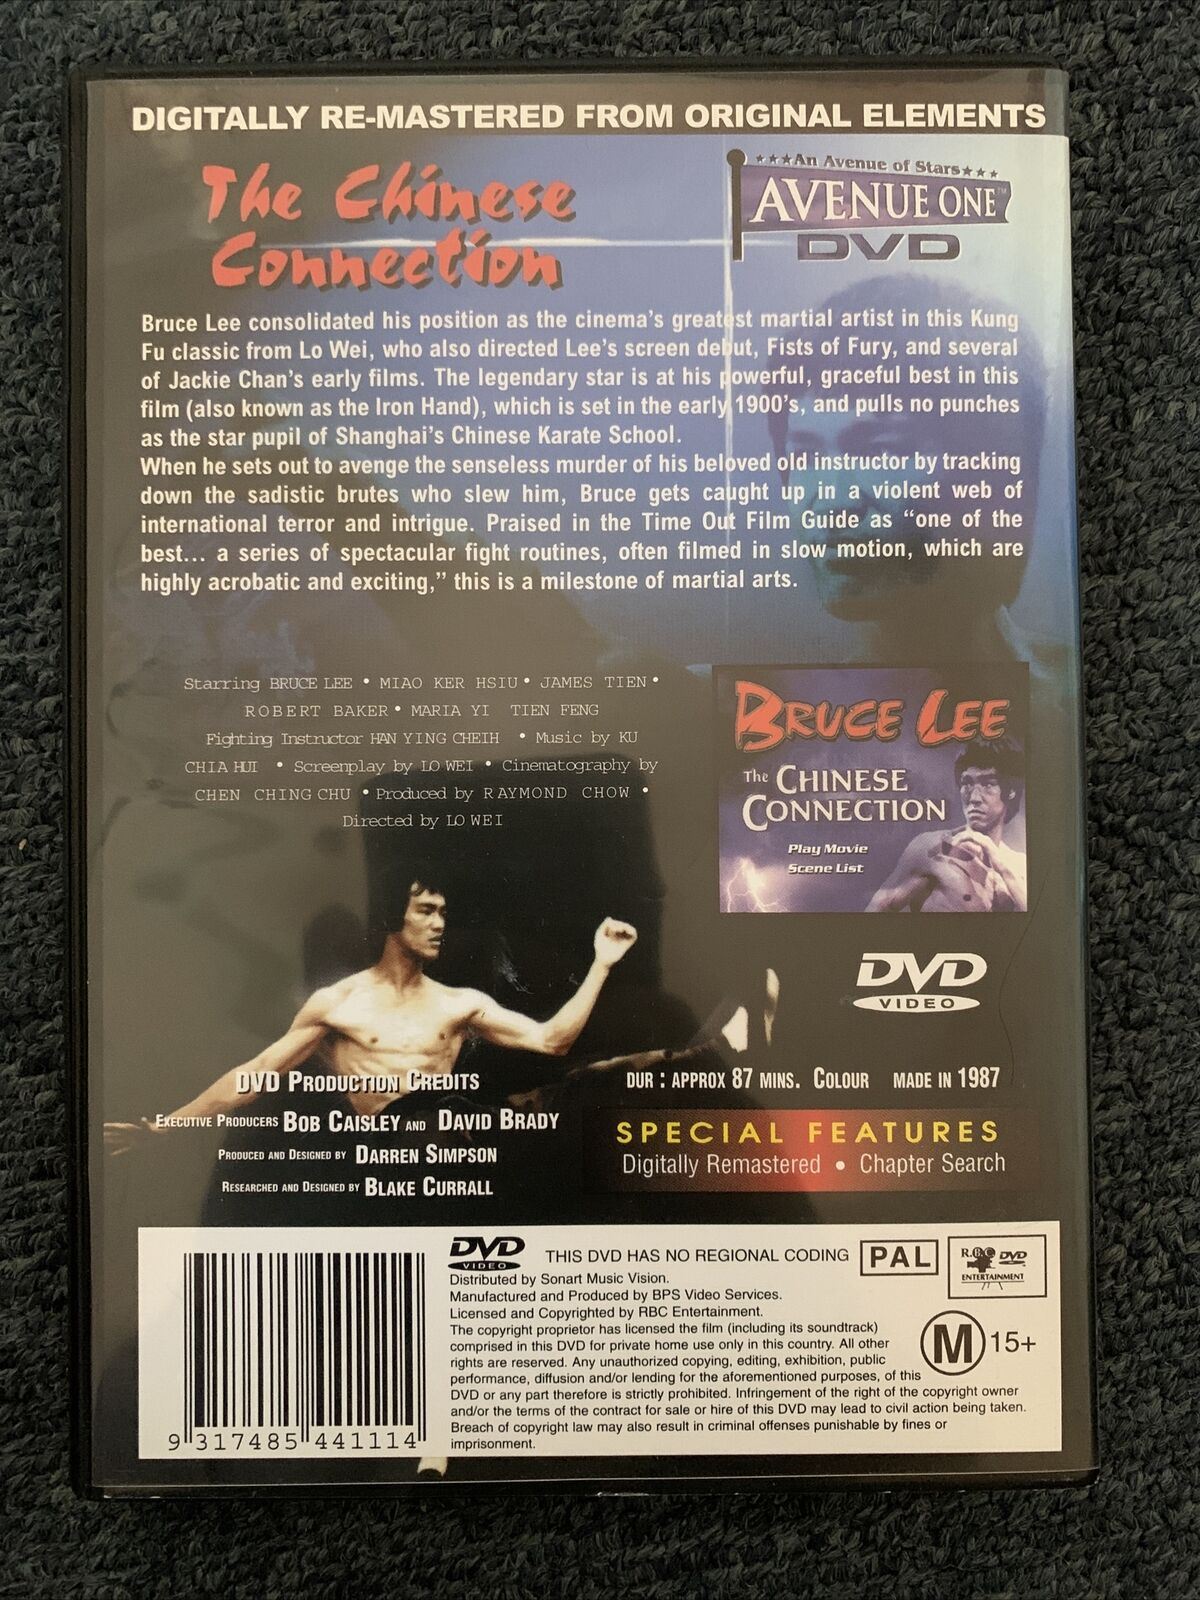 The Chinese Connection - Fist of Fury (DVD, 1987) Bruce Lee